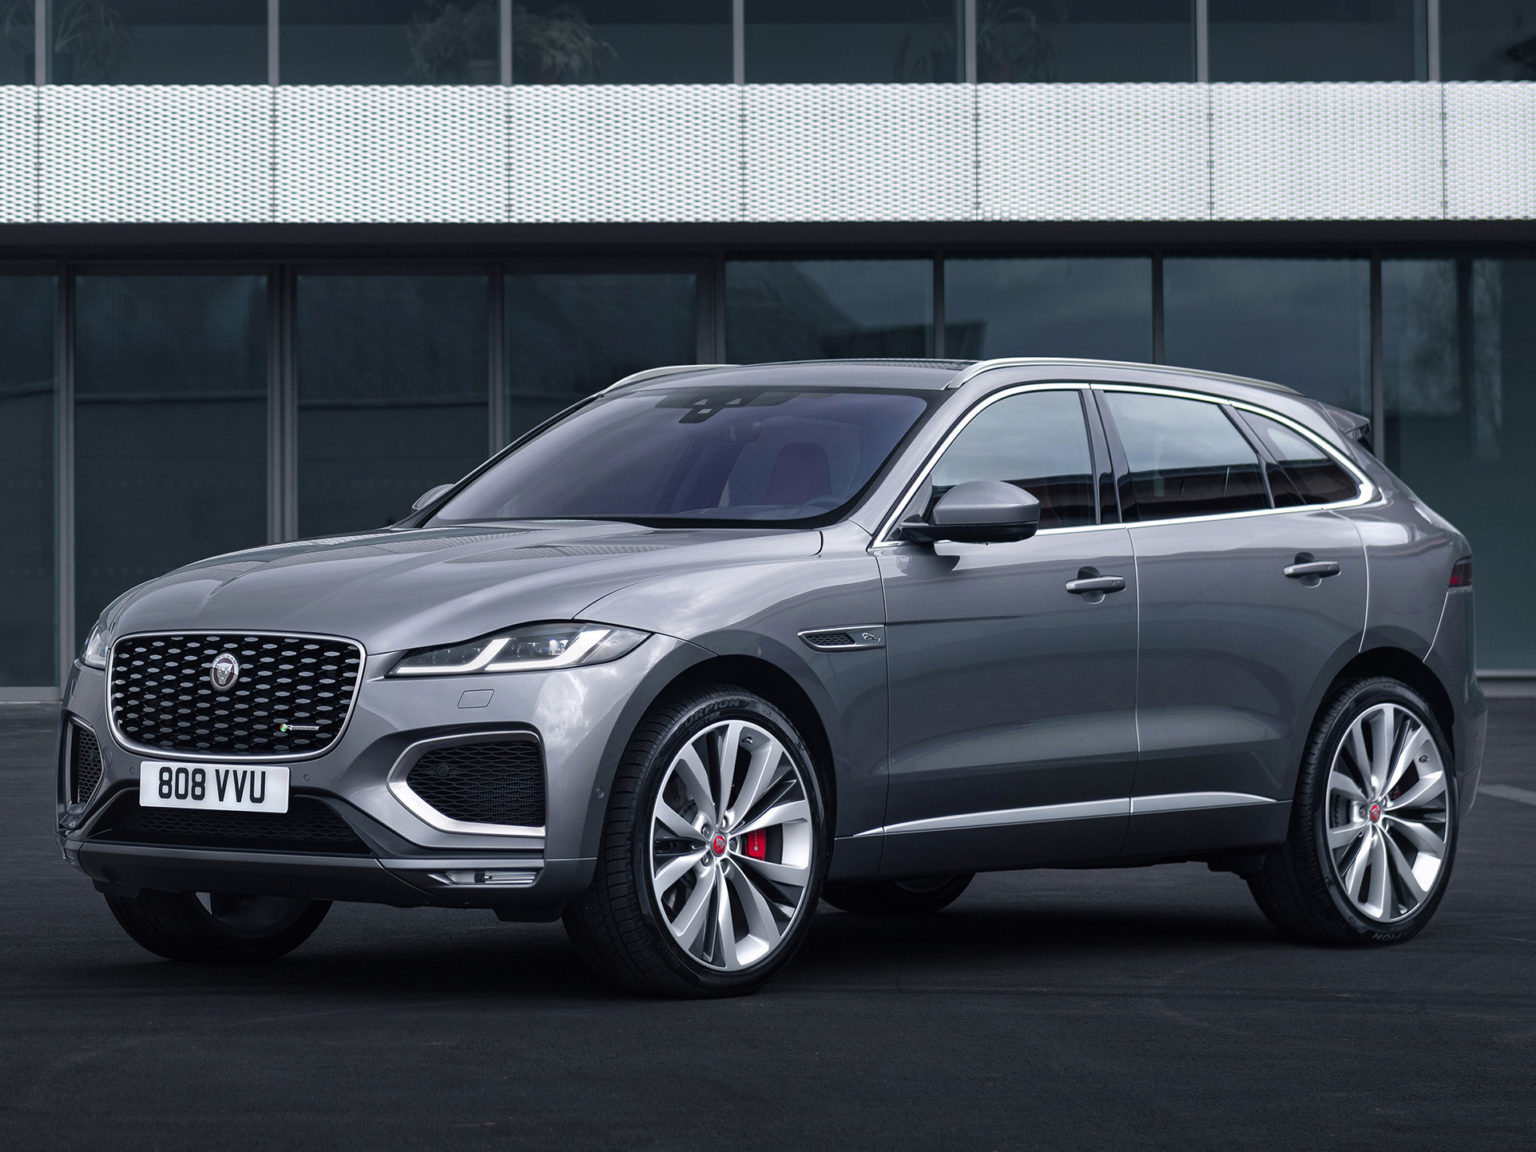 The Jaguar F-Pace has been significantly refreshed for the 2021 model year.